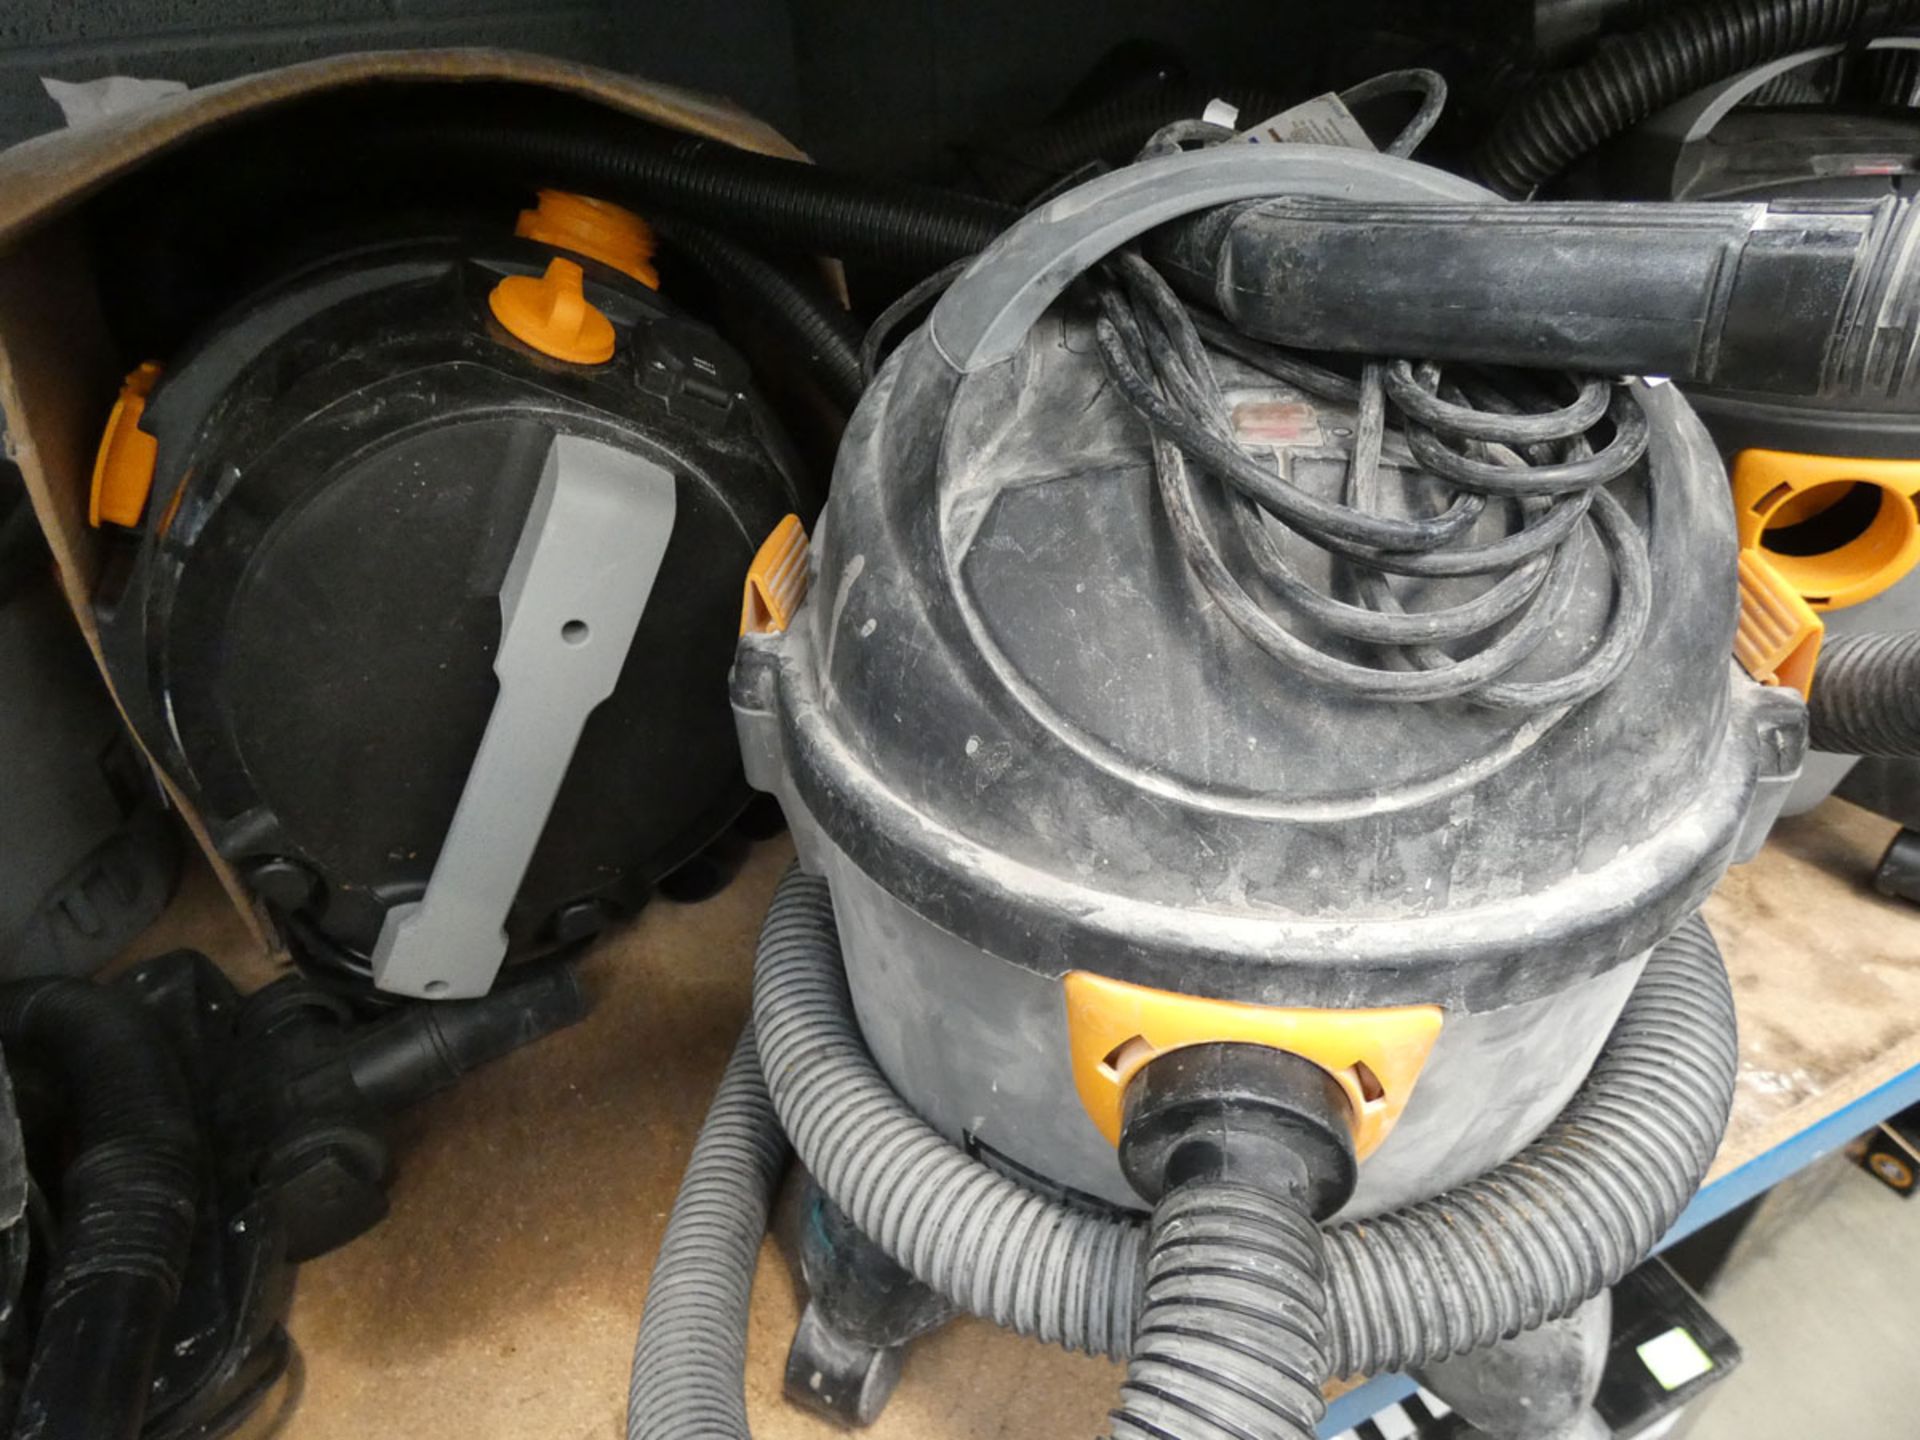 Wet and dry vac and small Titan vac